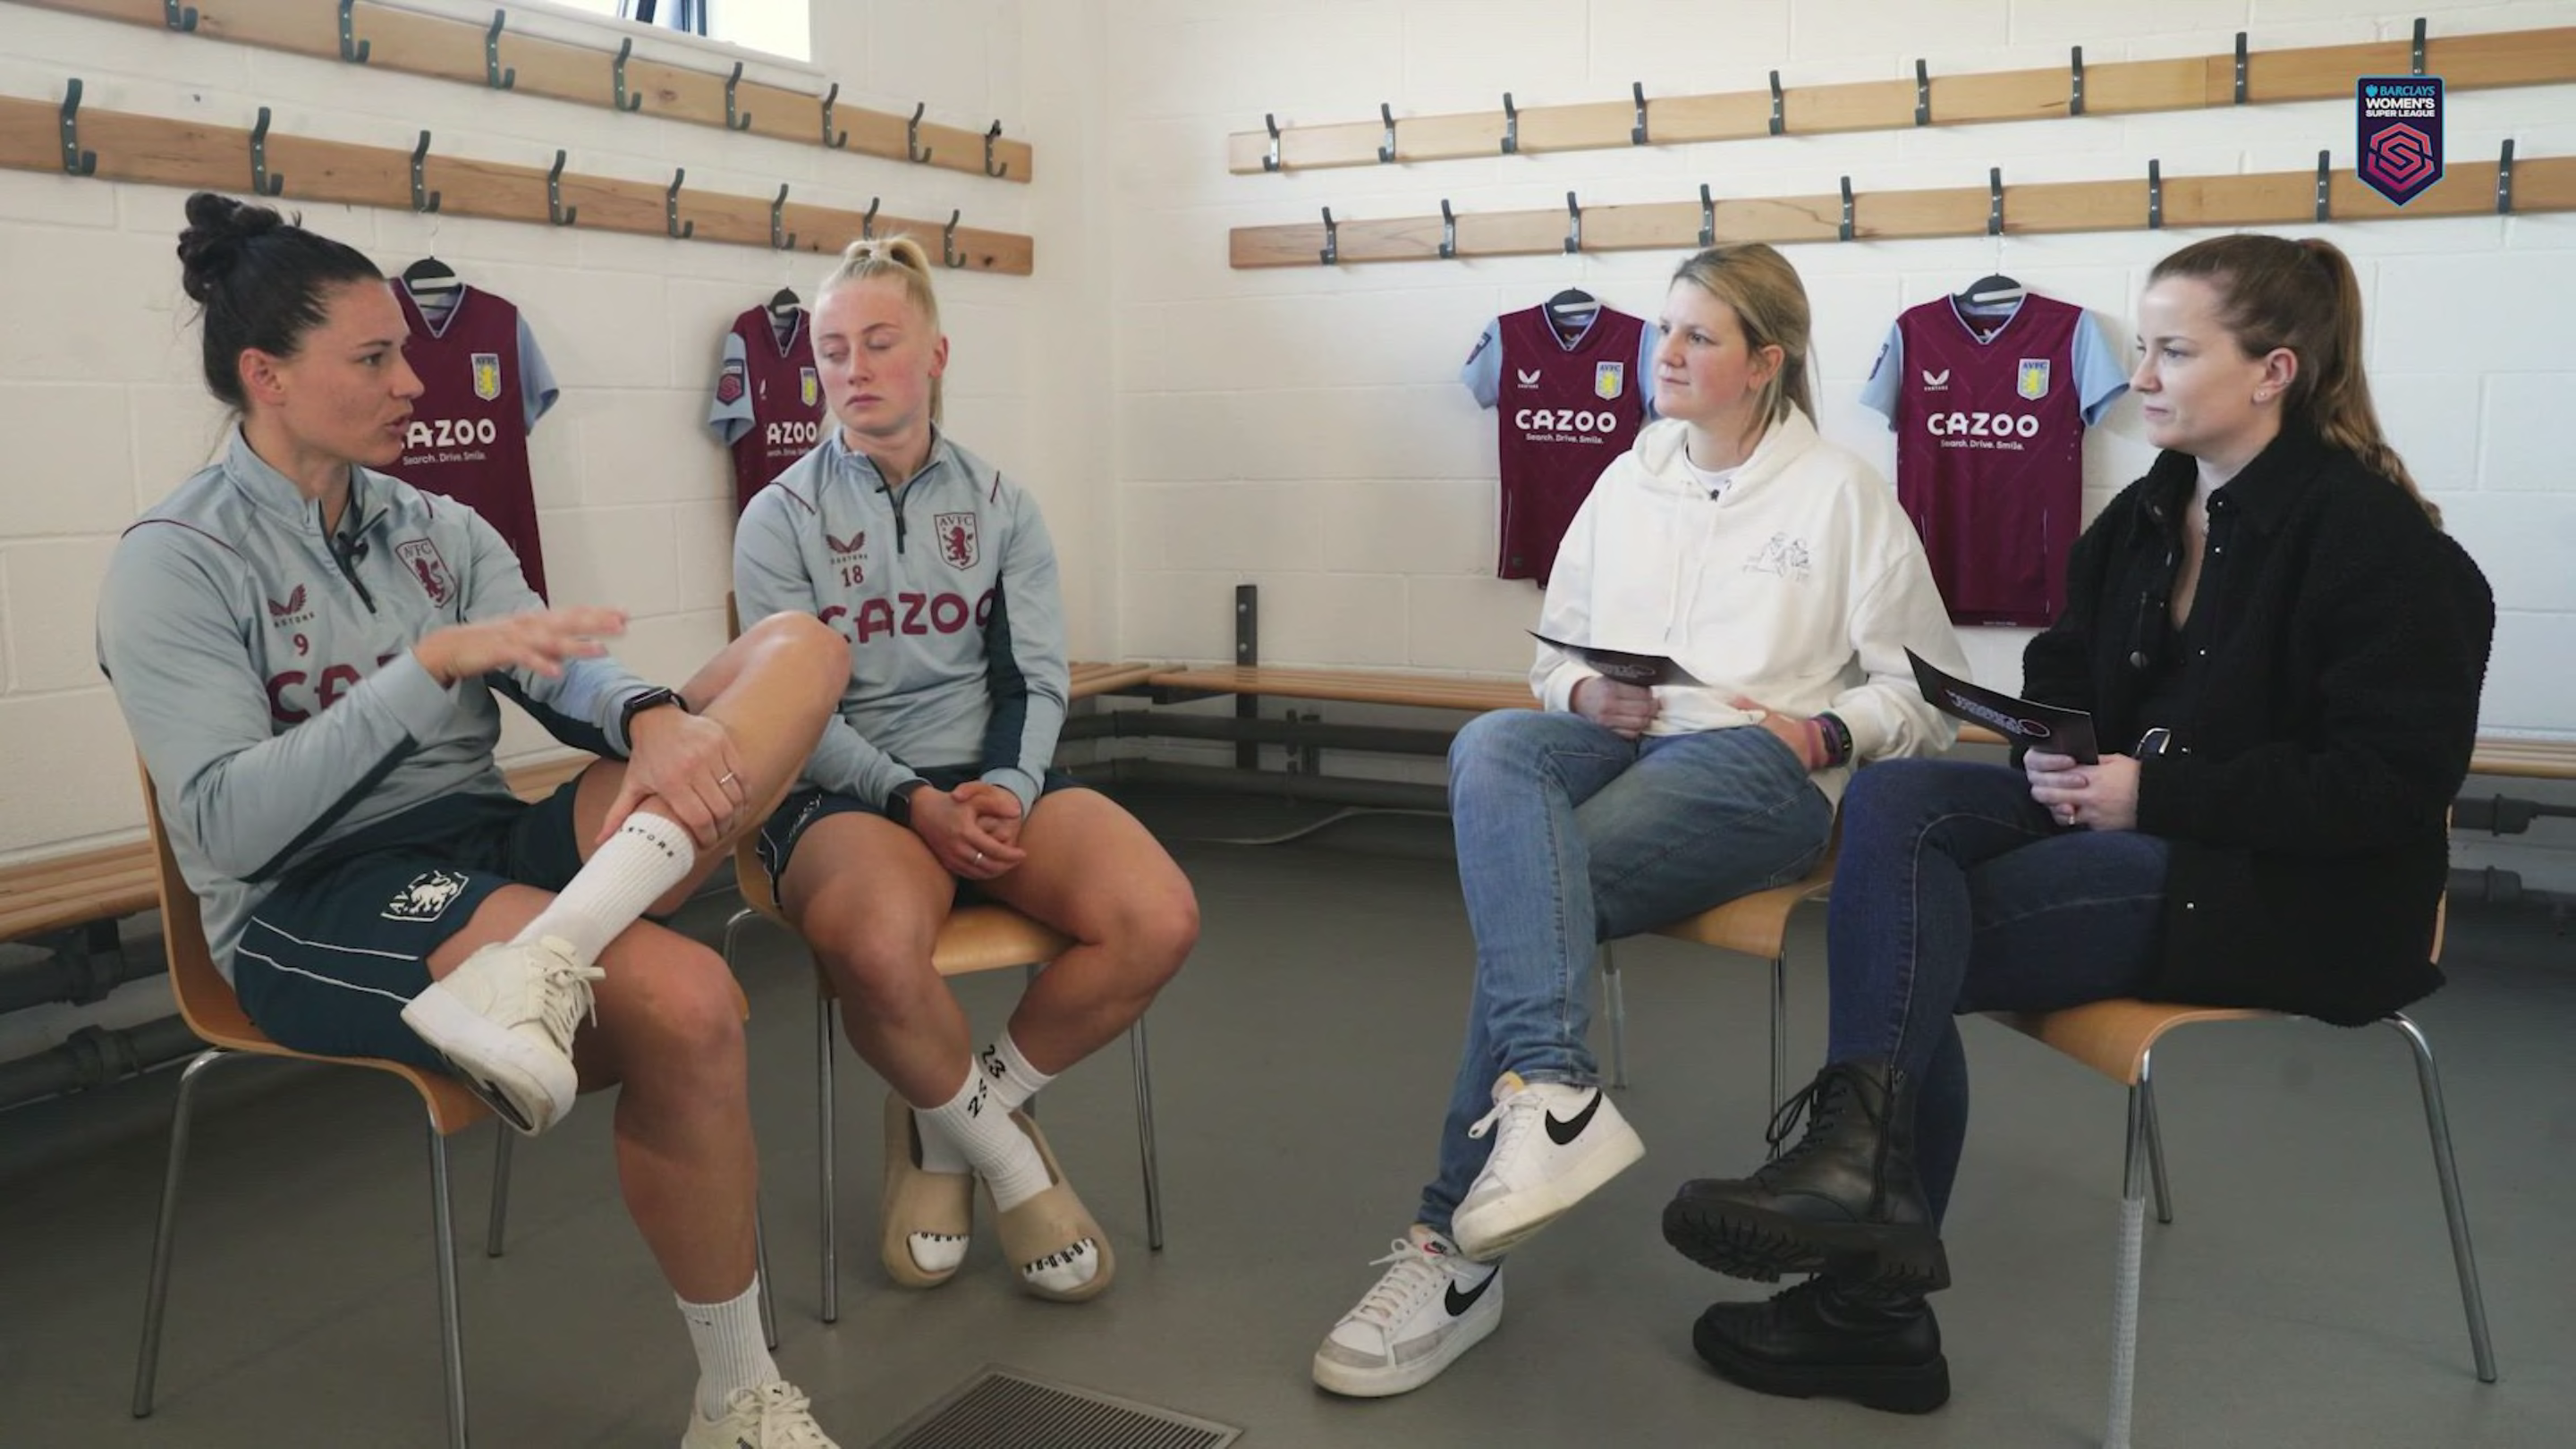 WSL Women's Football Weekend: 'What it Means' with Freya Gregory and Emily Gielnik